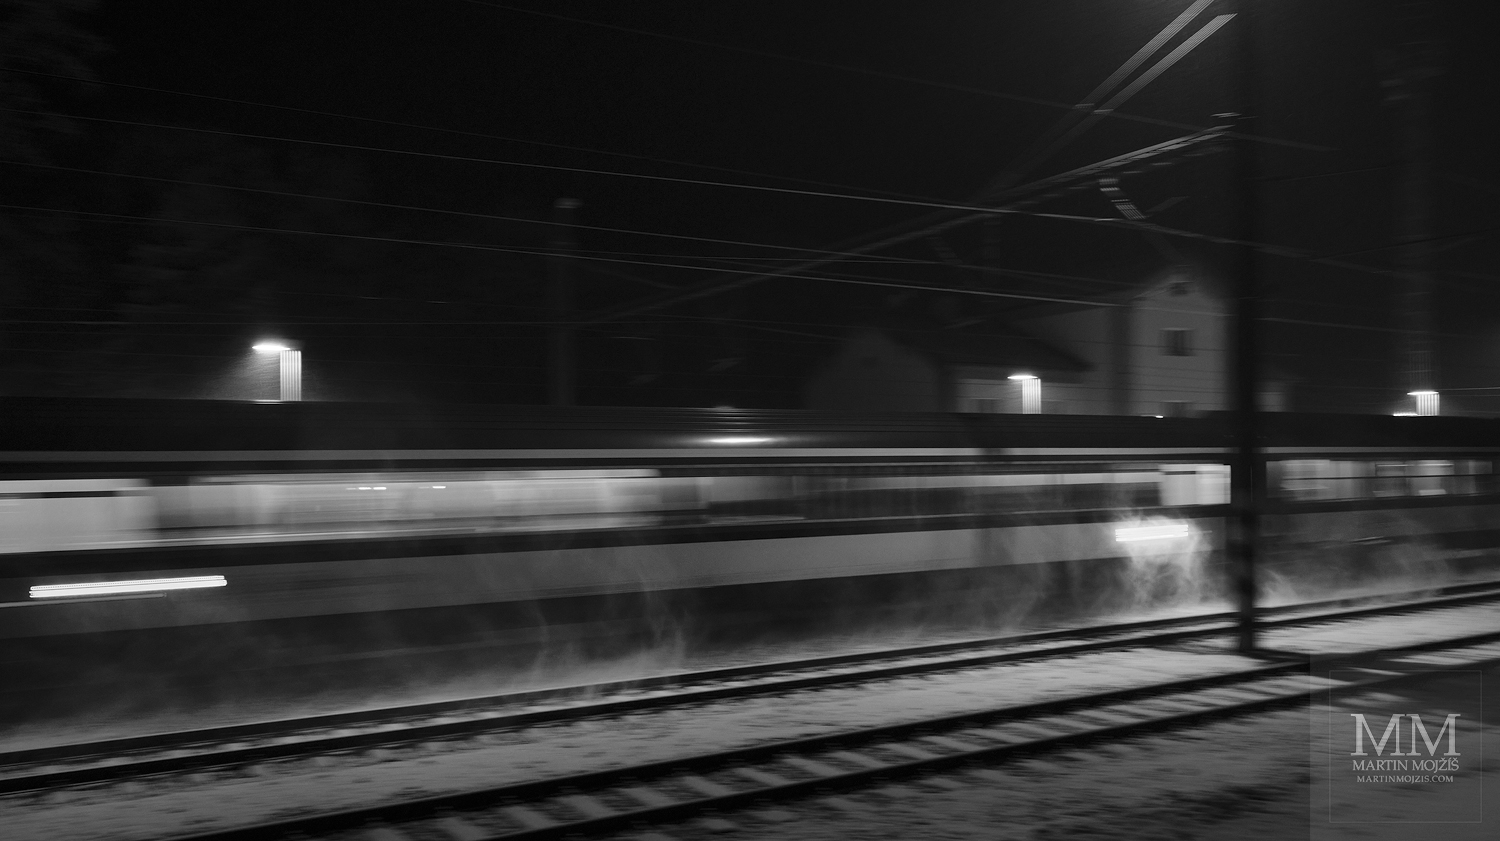 Night train running on an illuminated snowy track. Black and white fine art photograph THROUGH THE SNOWY NIGHT II., photographed by Martin Mojzis.